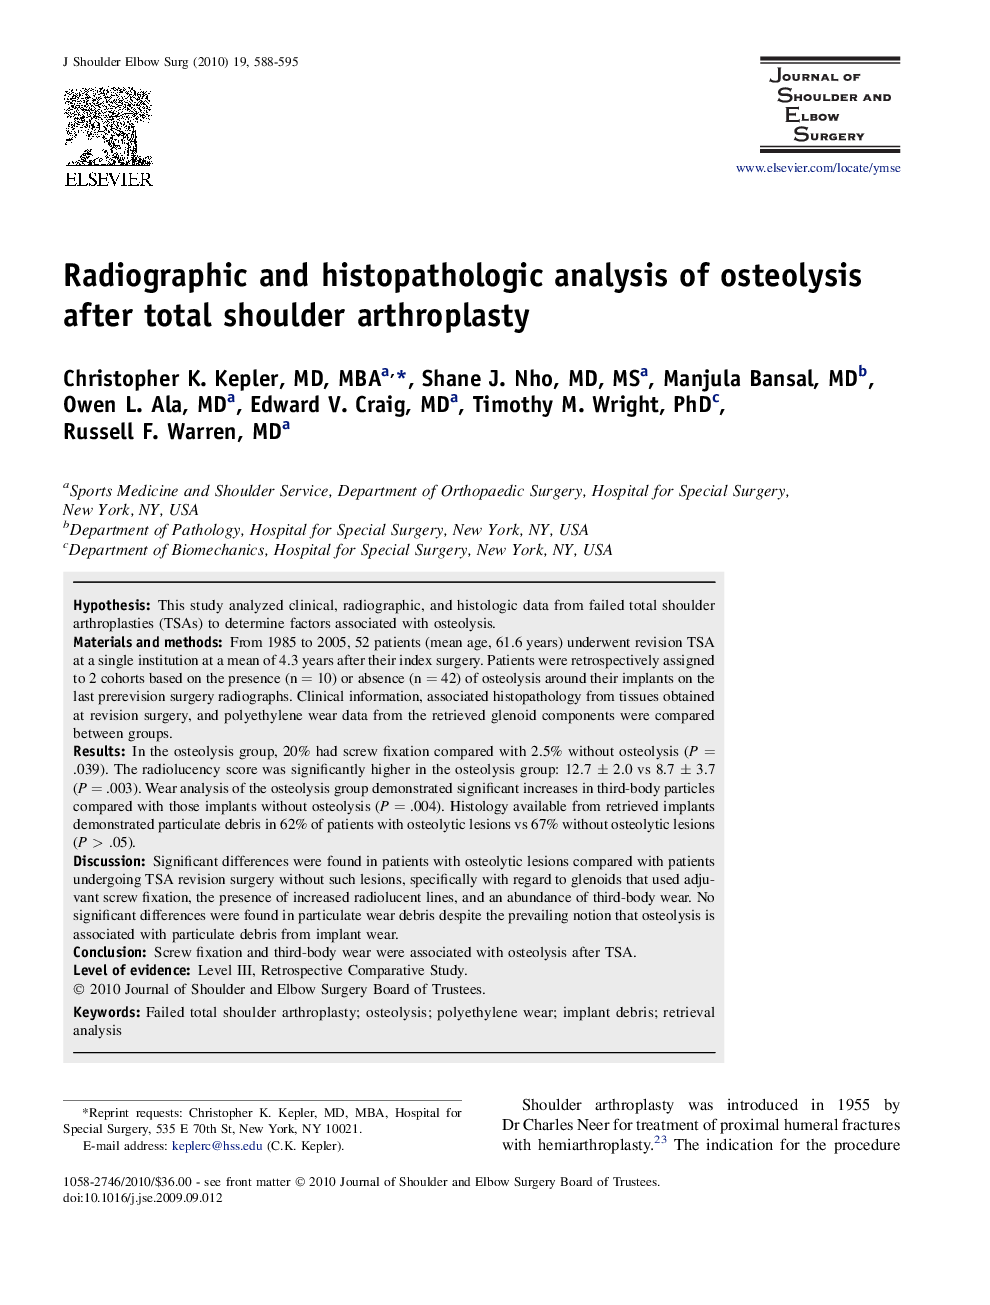 Radiographic and histopathologic analysis of osteolysis after total shoulder arthroplasty